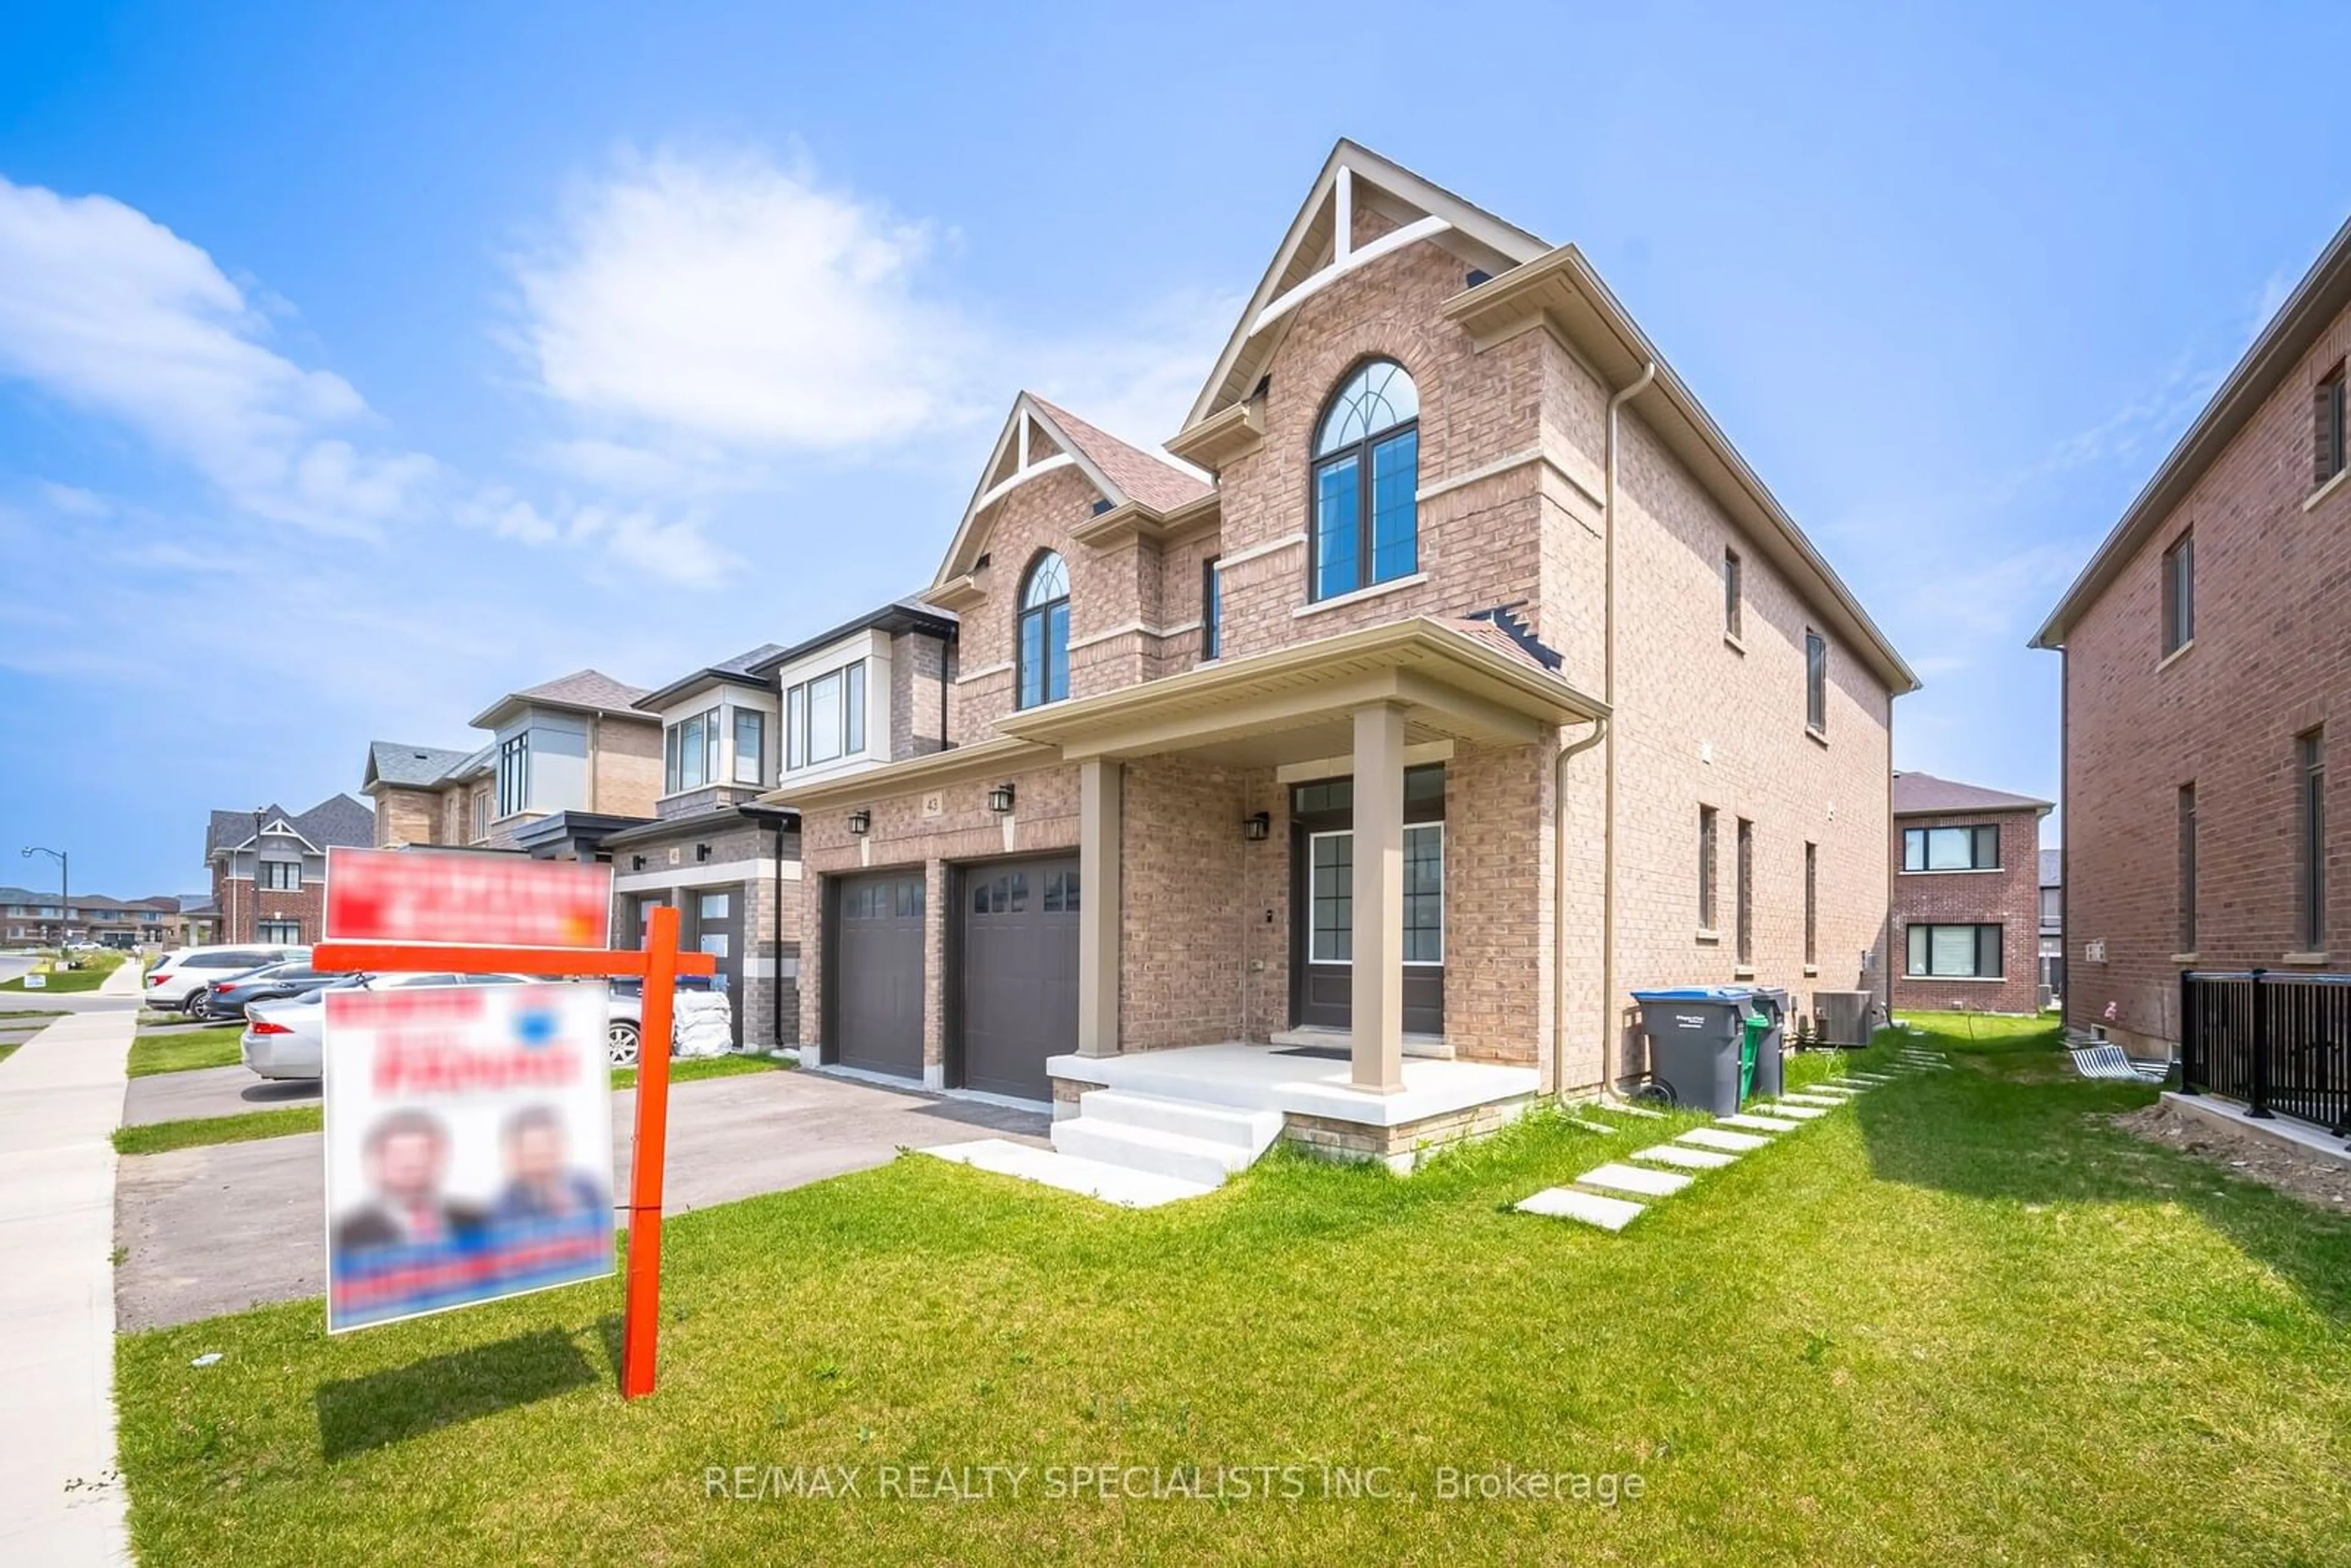 Home with brick exterior material for 43 Petch Ave, Caledon Ontario L7C 0Y9